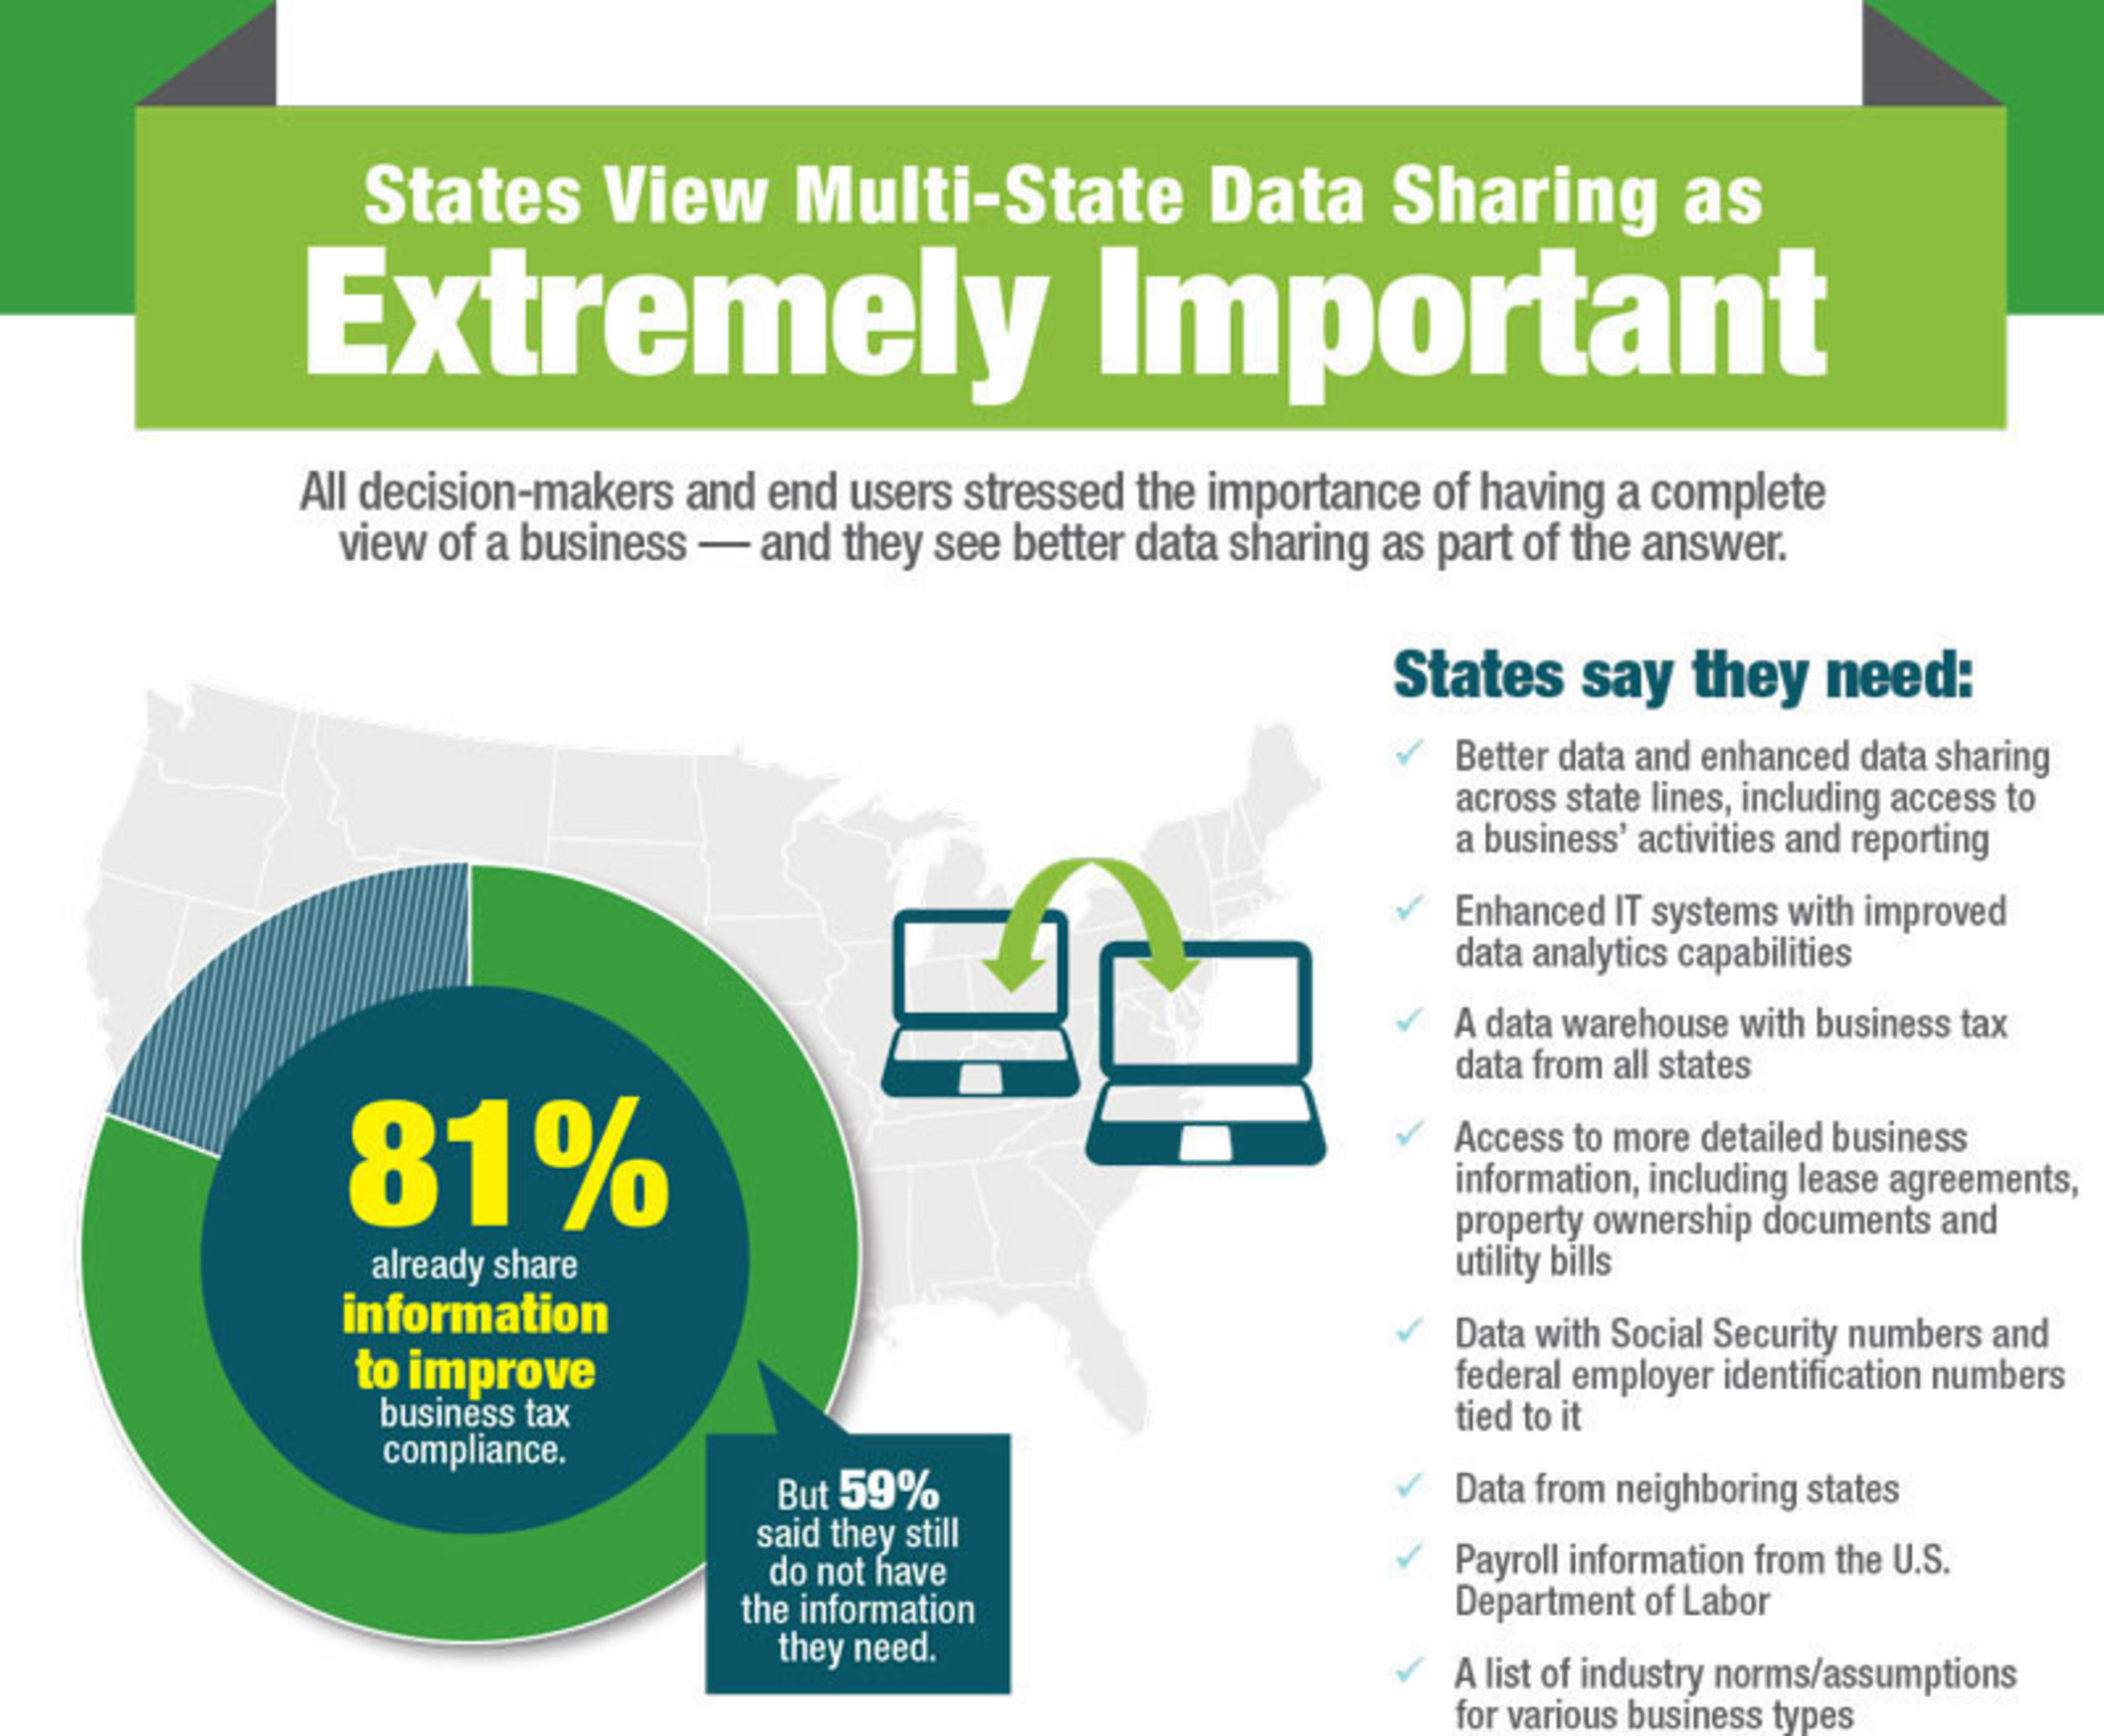 Business tax compliance and the states. According to research conducted by the Governing Institute, states view multi-state data sharing as extremely important. Research sponsor: LexisNexis Risk Solutions.